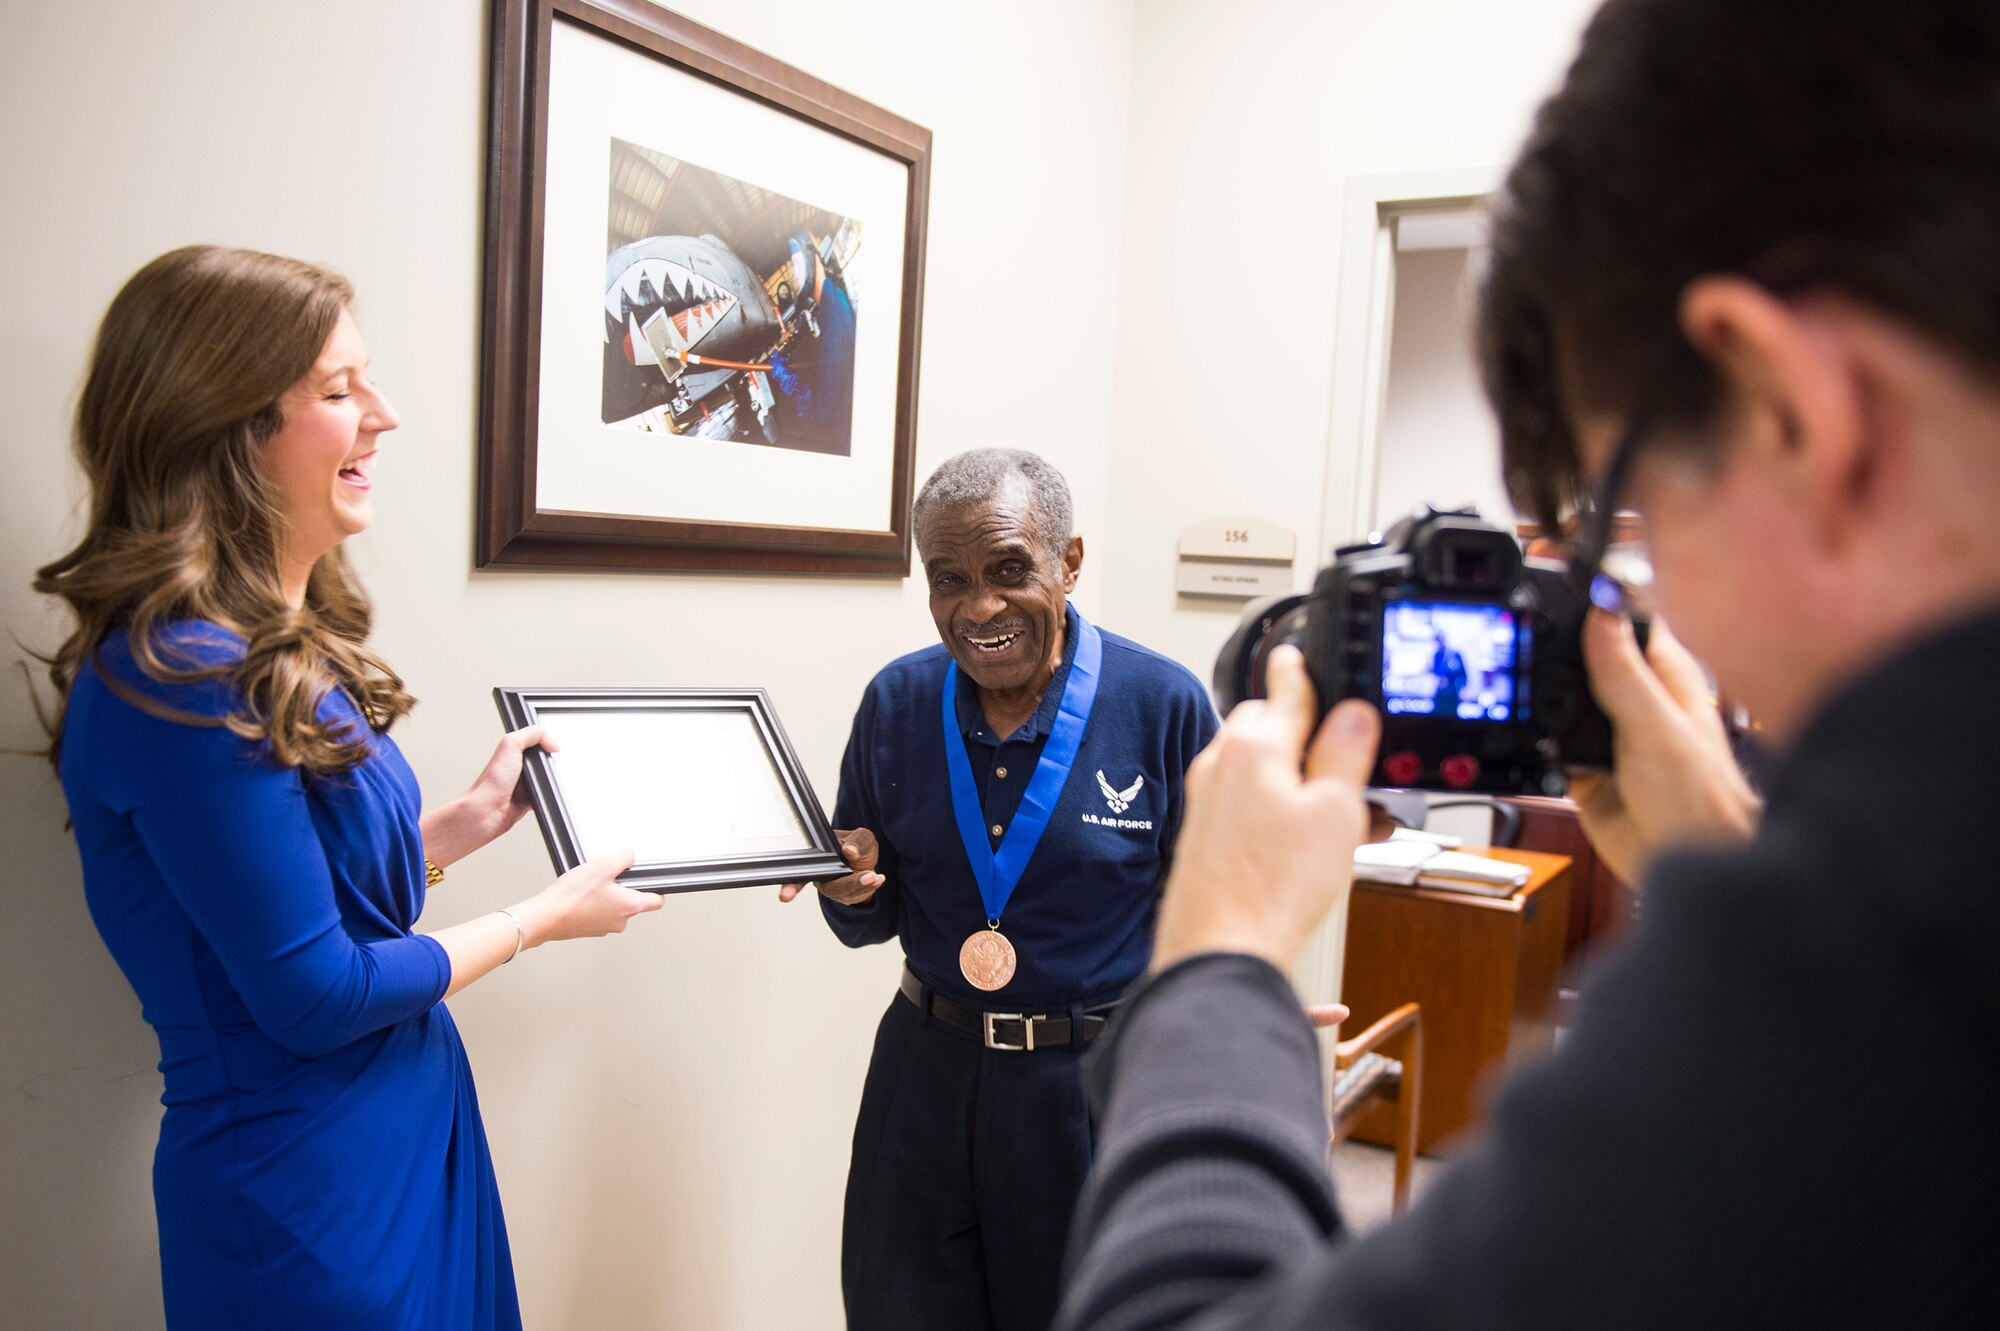 Tracey Smith, a local reporter, shares a laugh with retired U.S. Air Force Chief Master Sgt. James Ingram, 23d Wing retiree activities office director, Jan. 12, 2016, at Moody Air Force Base, Ga. Smith and her camera crew surprised Ingram at work and presented him with the Jefferson Award. The founders created the Jefferson Award in 1972 to establish a Nobel Prize for public service. (U.S. Air Force photo by Senior Airman Ceaira Tinsley/Released)